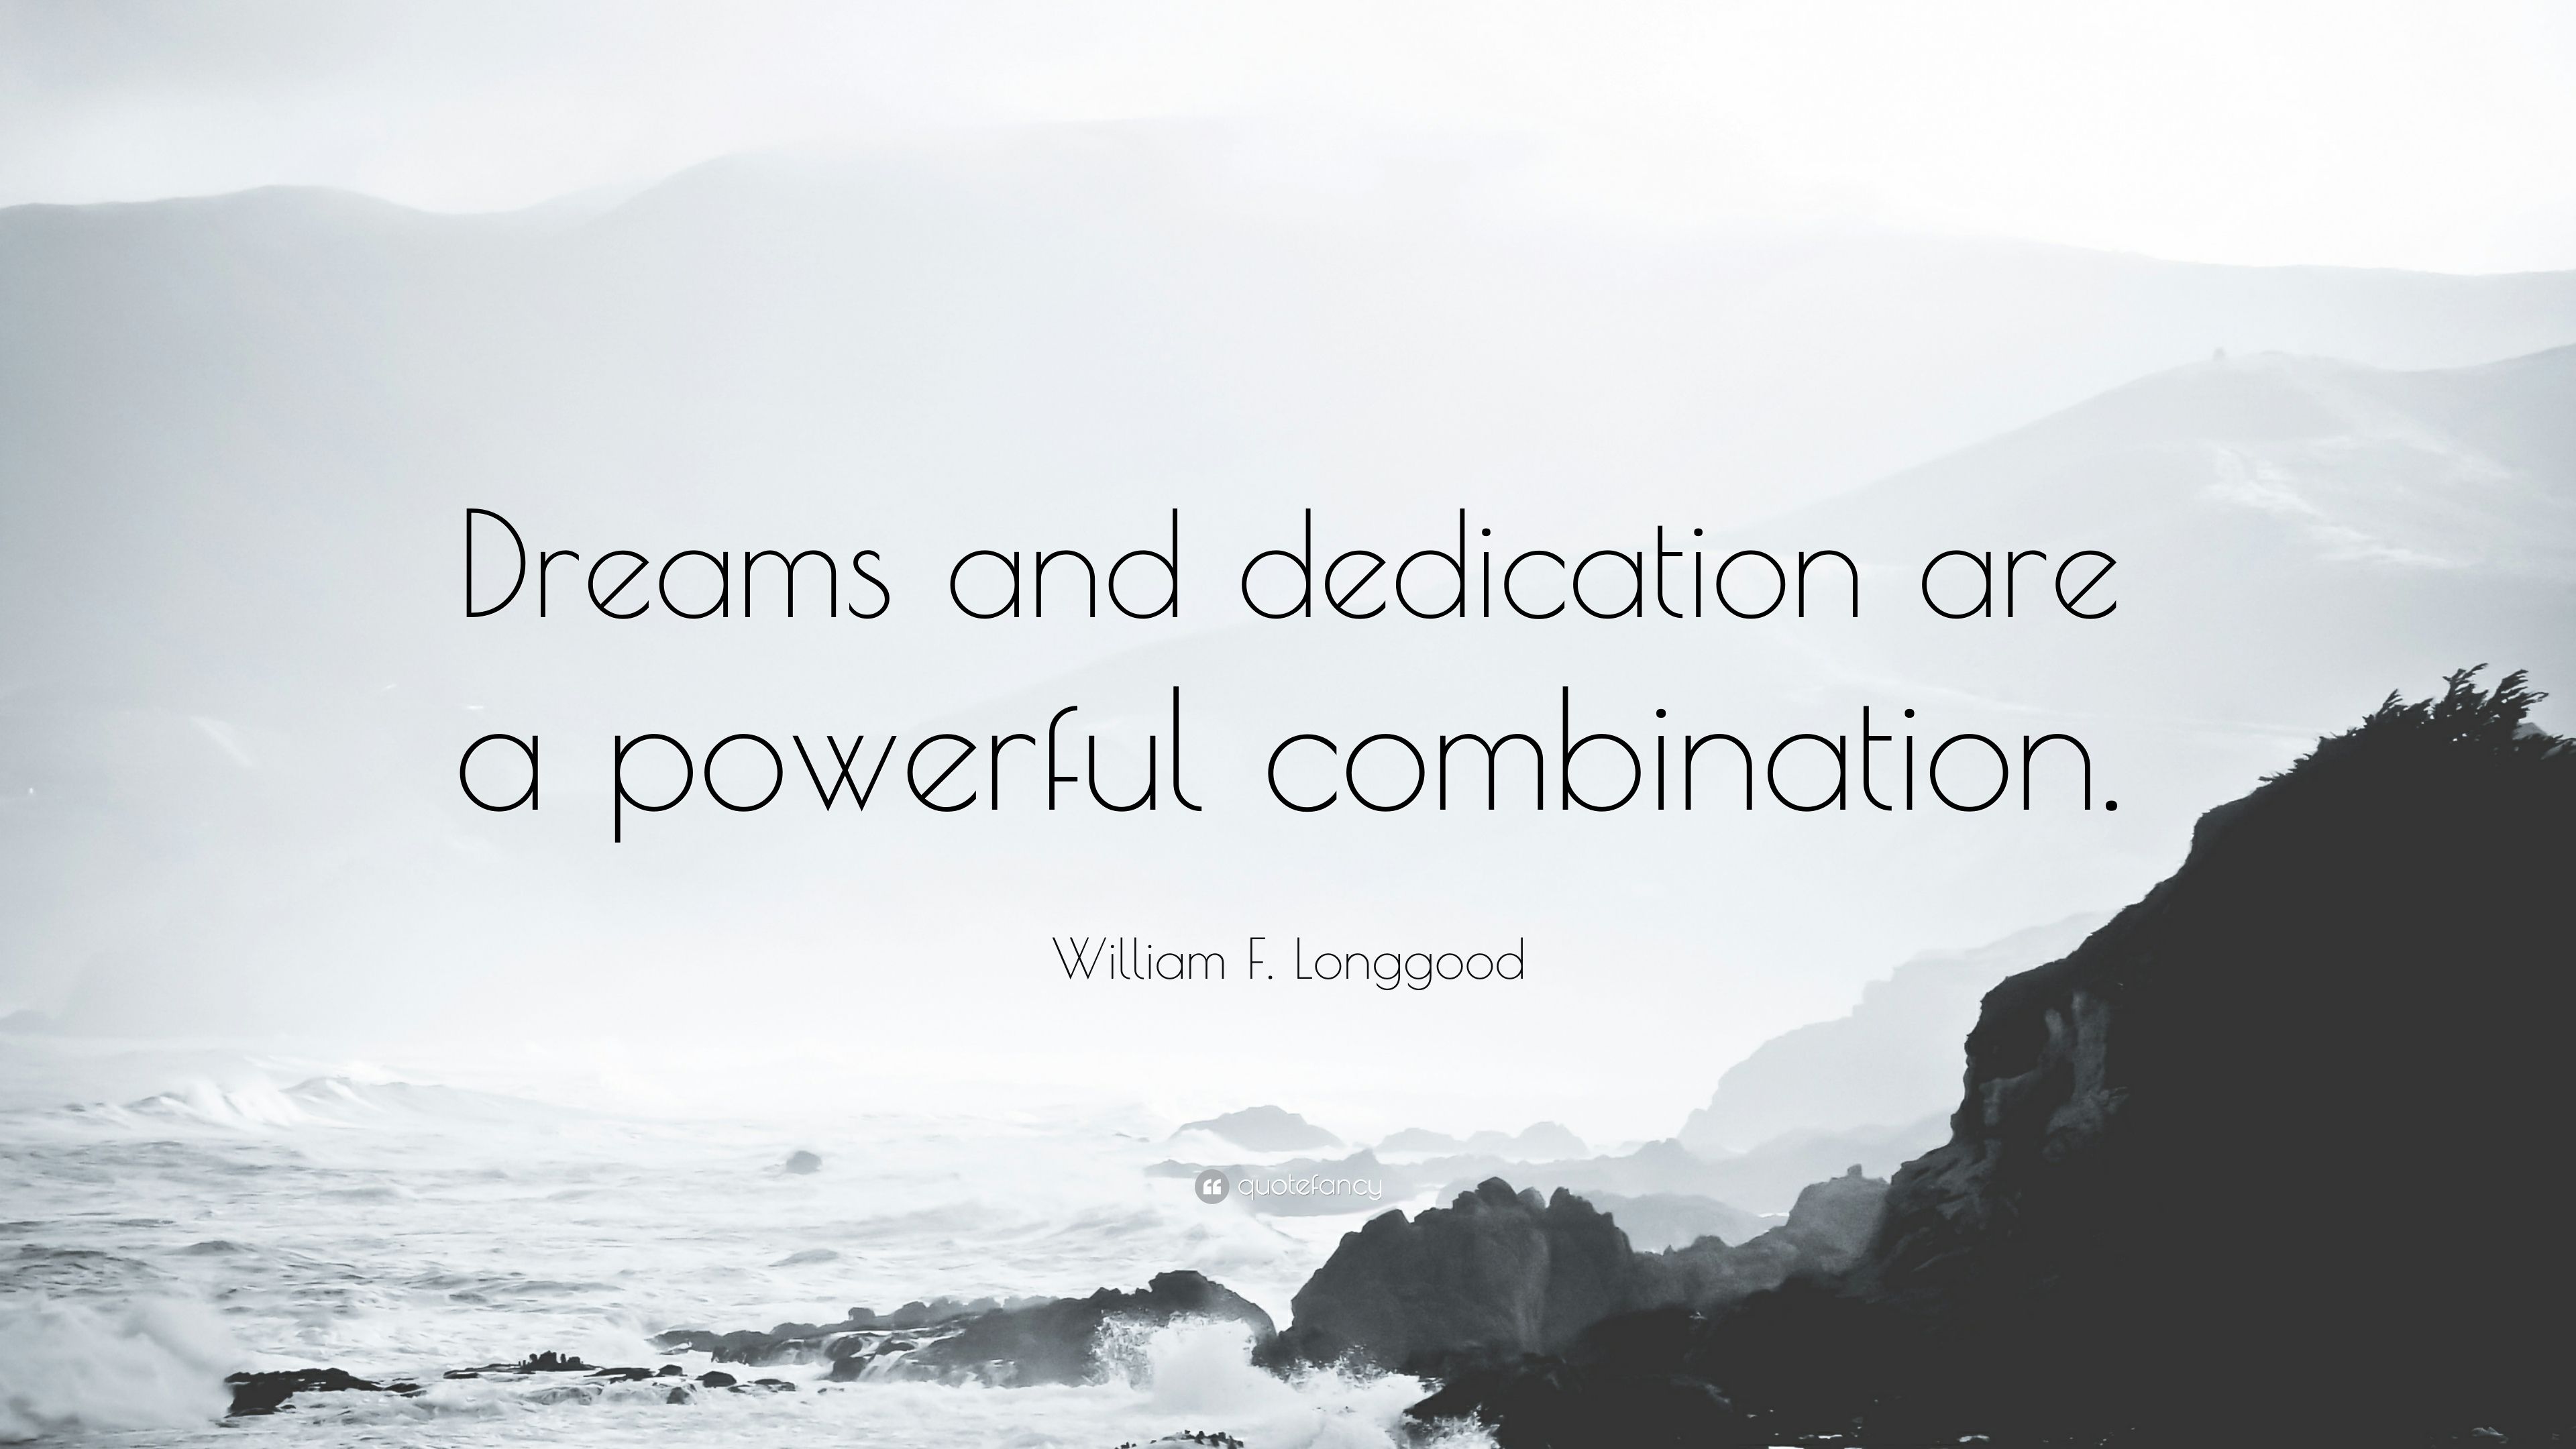 William F. Longgood Quote: “Dreams and dedication are a powerful